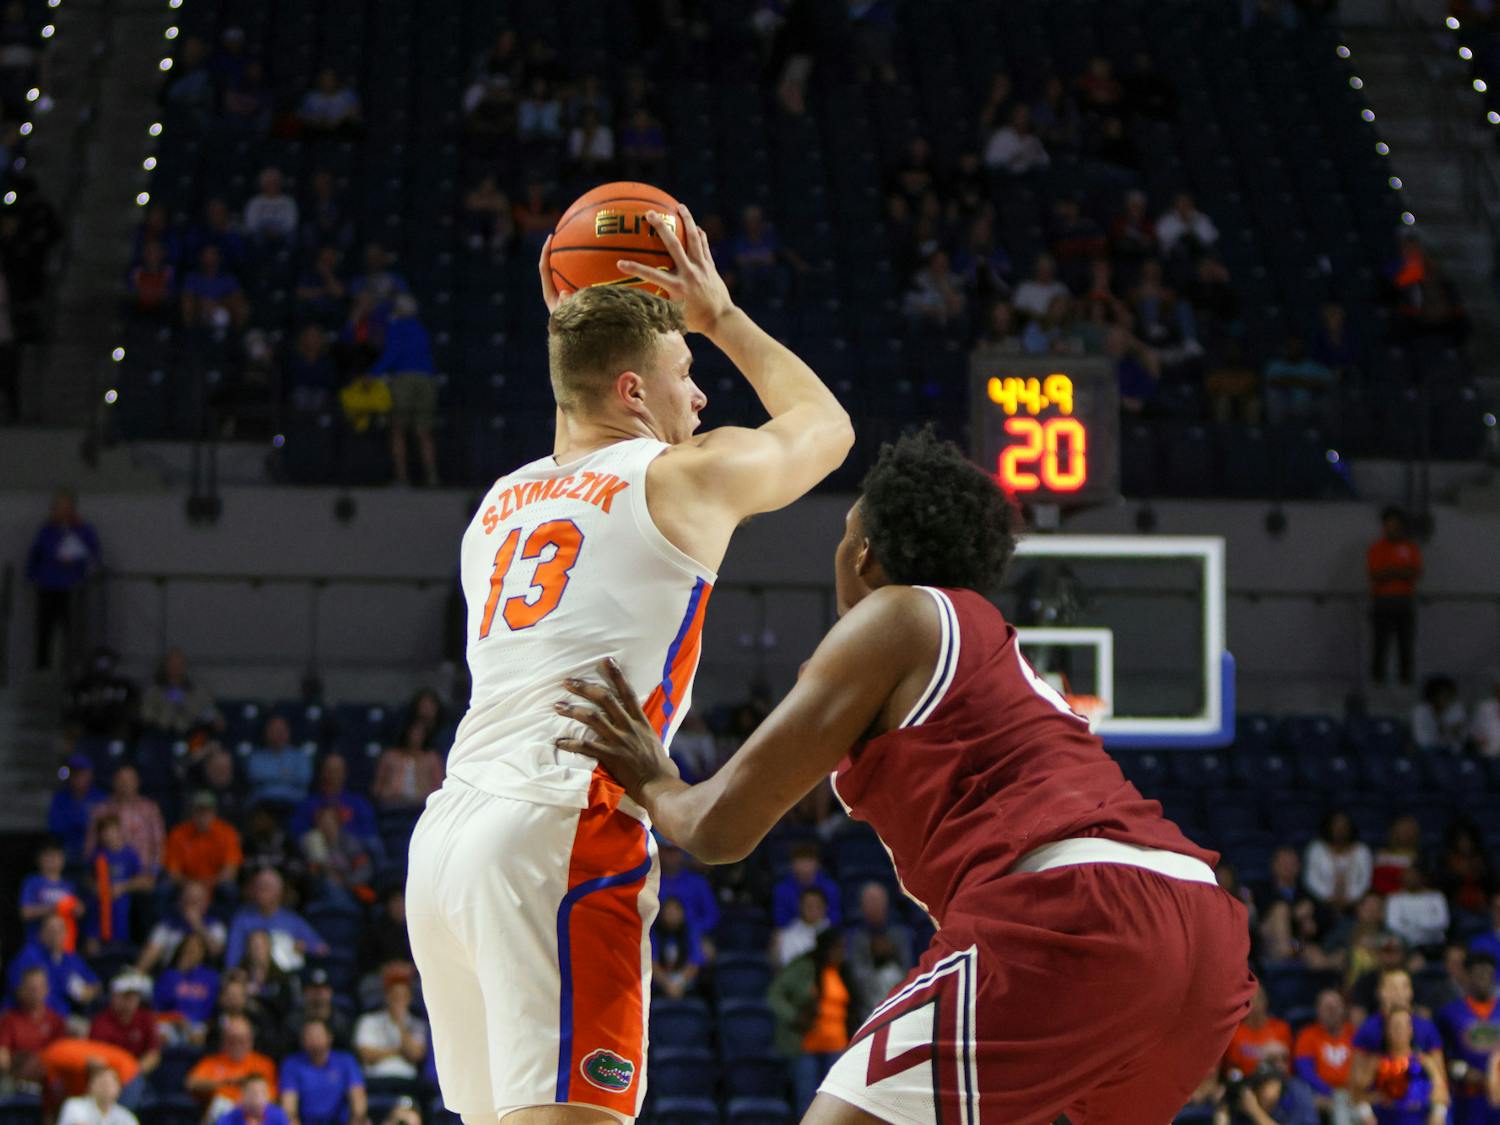 Aleks Szymczyk looks to pass the ball in the Gators men's basketball's 81-60 win against the South Carolina Gamecocks on Wednesday, Jan. 25, 2023. 